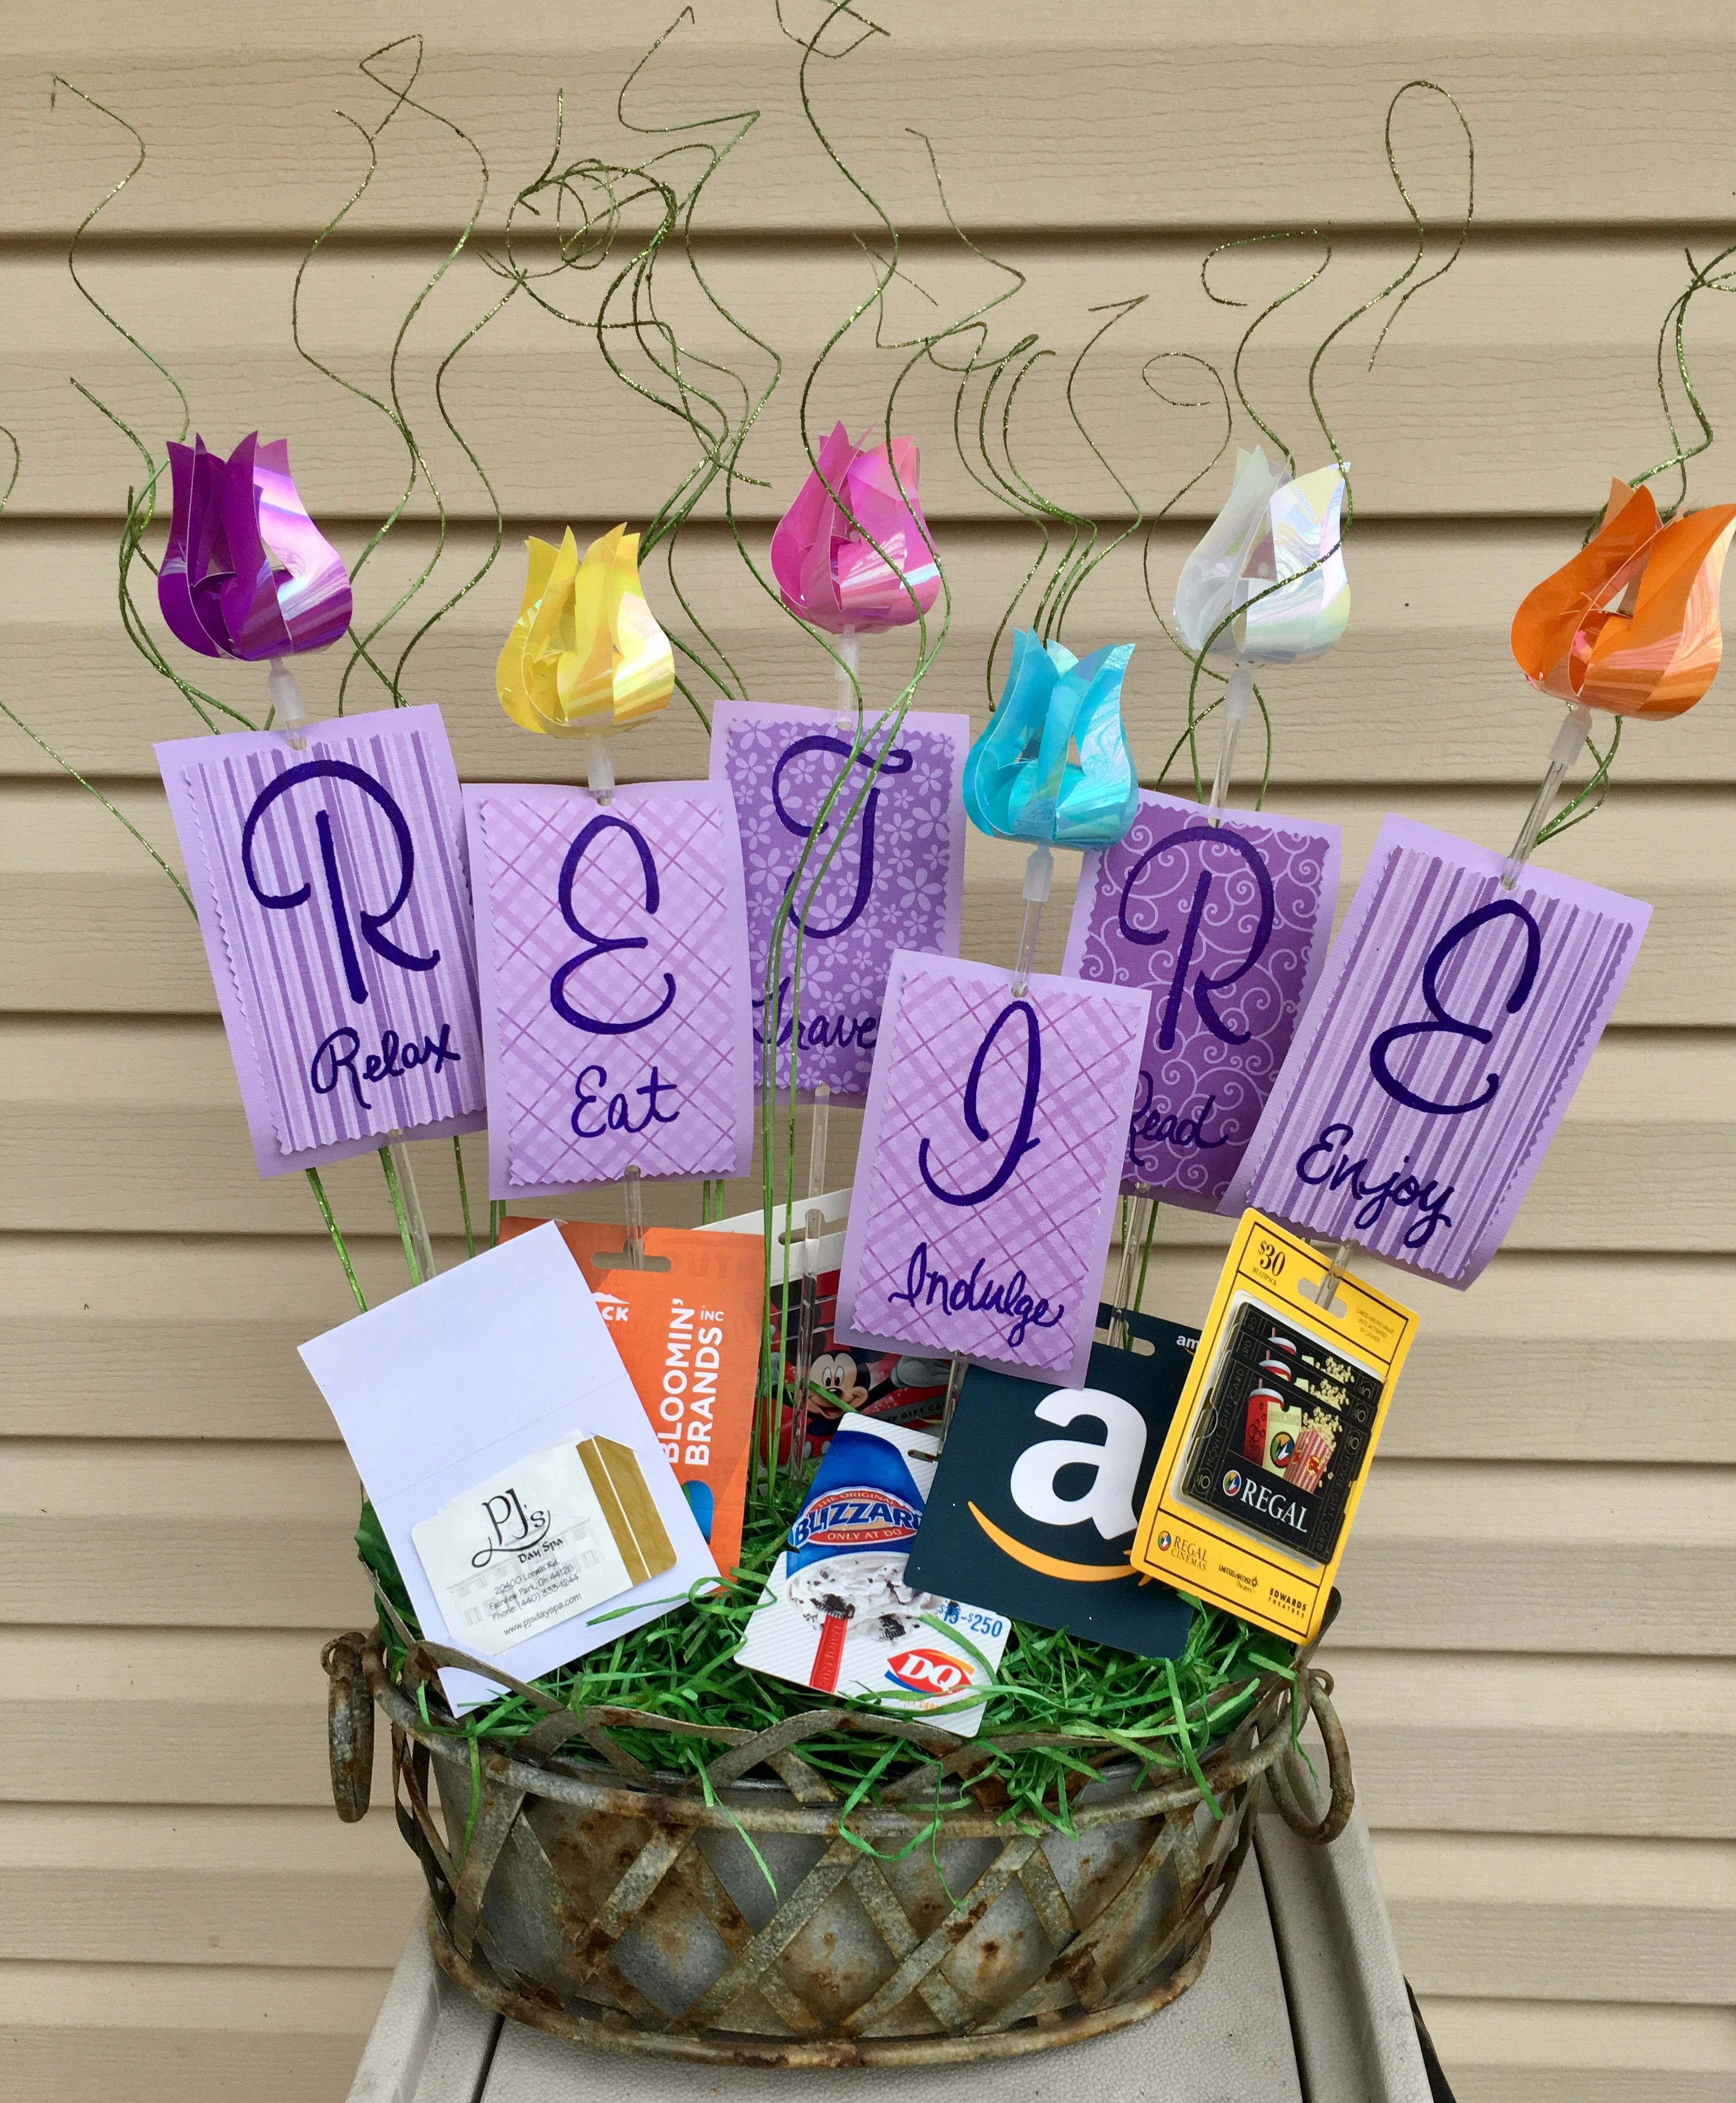 Retirement Party Gift Ideas
 Retirement t basket with t cards Relax Eat Travel